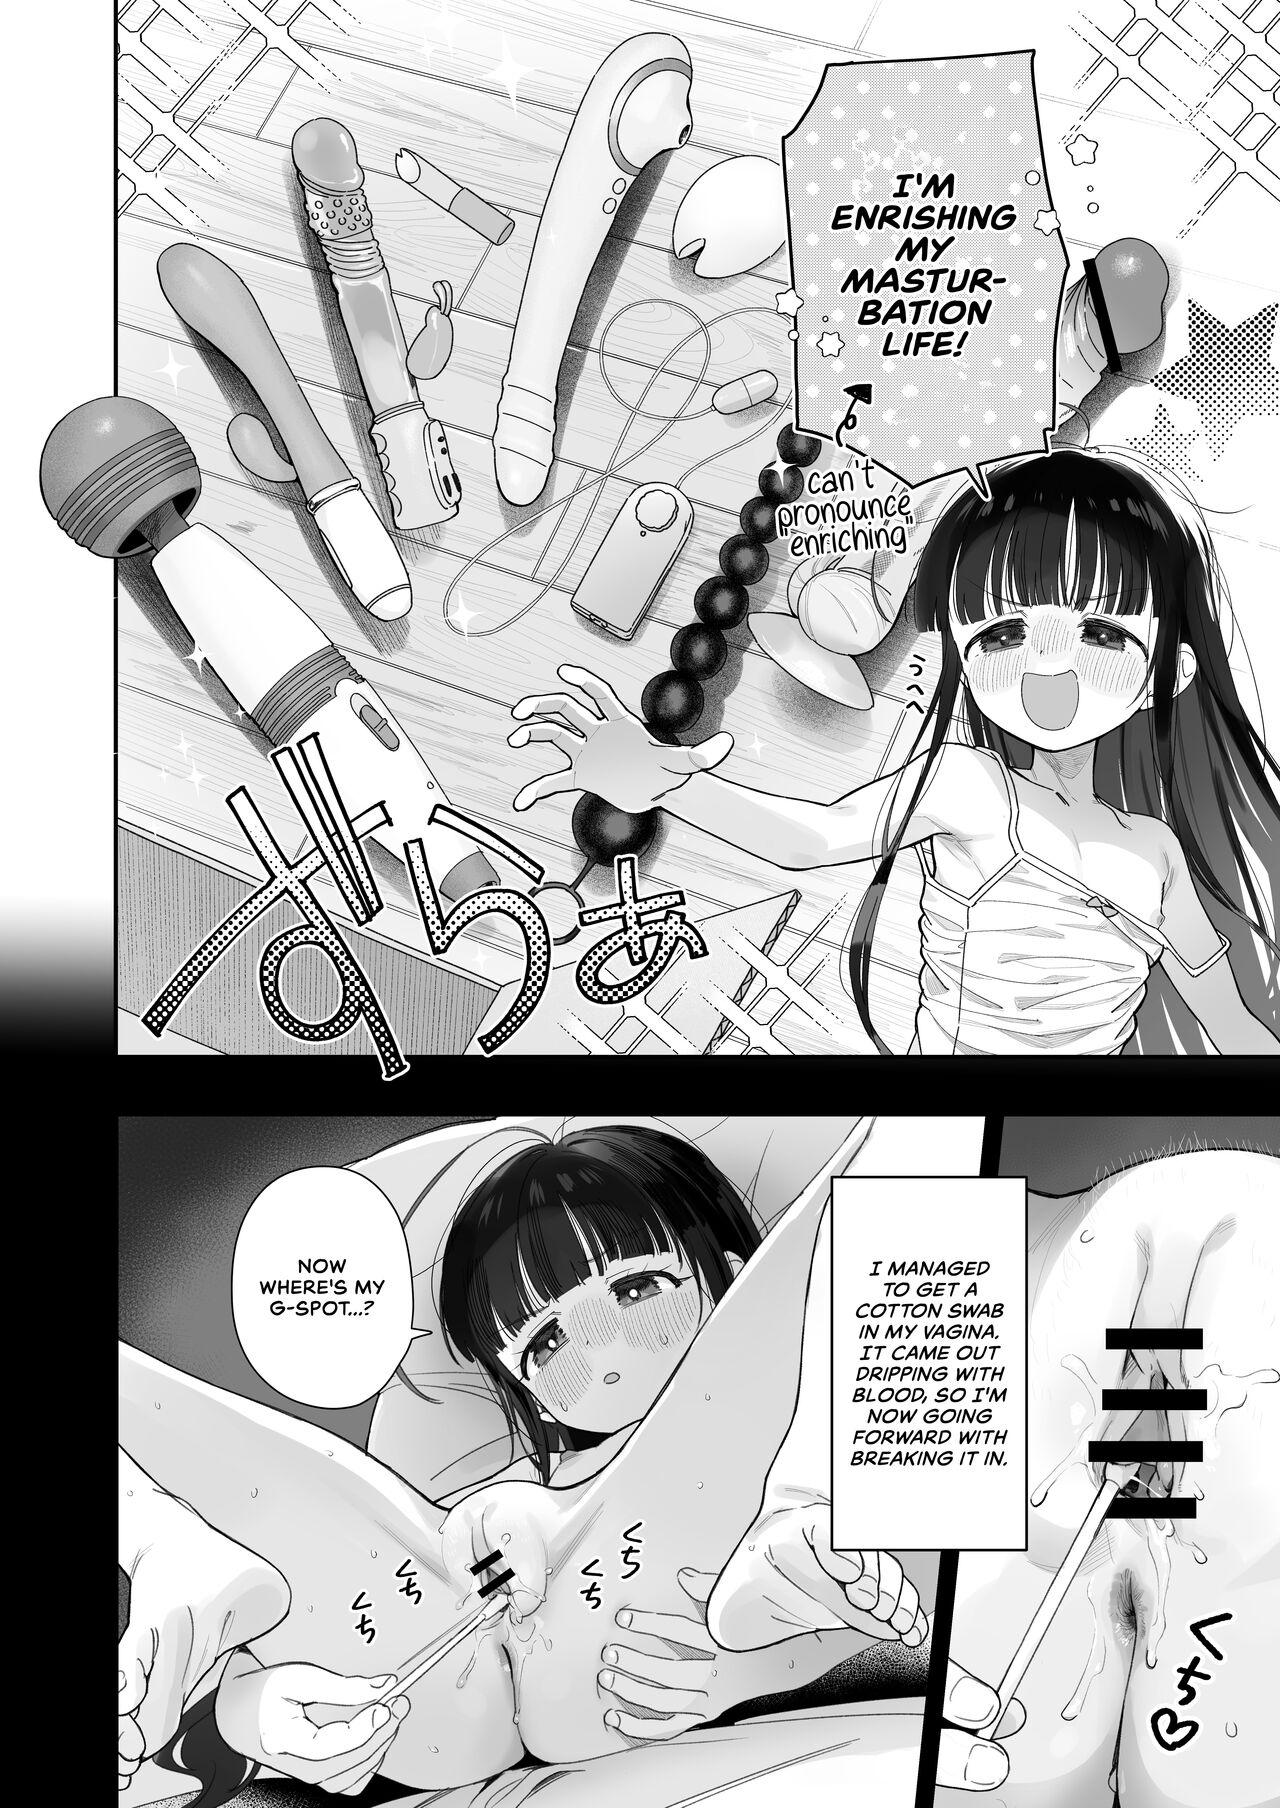 [Asunaro Neat. (Ronna)] TS Loli Oji-san no Bouken Onanie Hen | The Adventures of an Old Man Who Was Gender-Swapped Into a Loli ~Masturbation Chapter~ [English] [CulturedCommissions] [Digital] 18